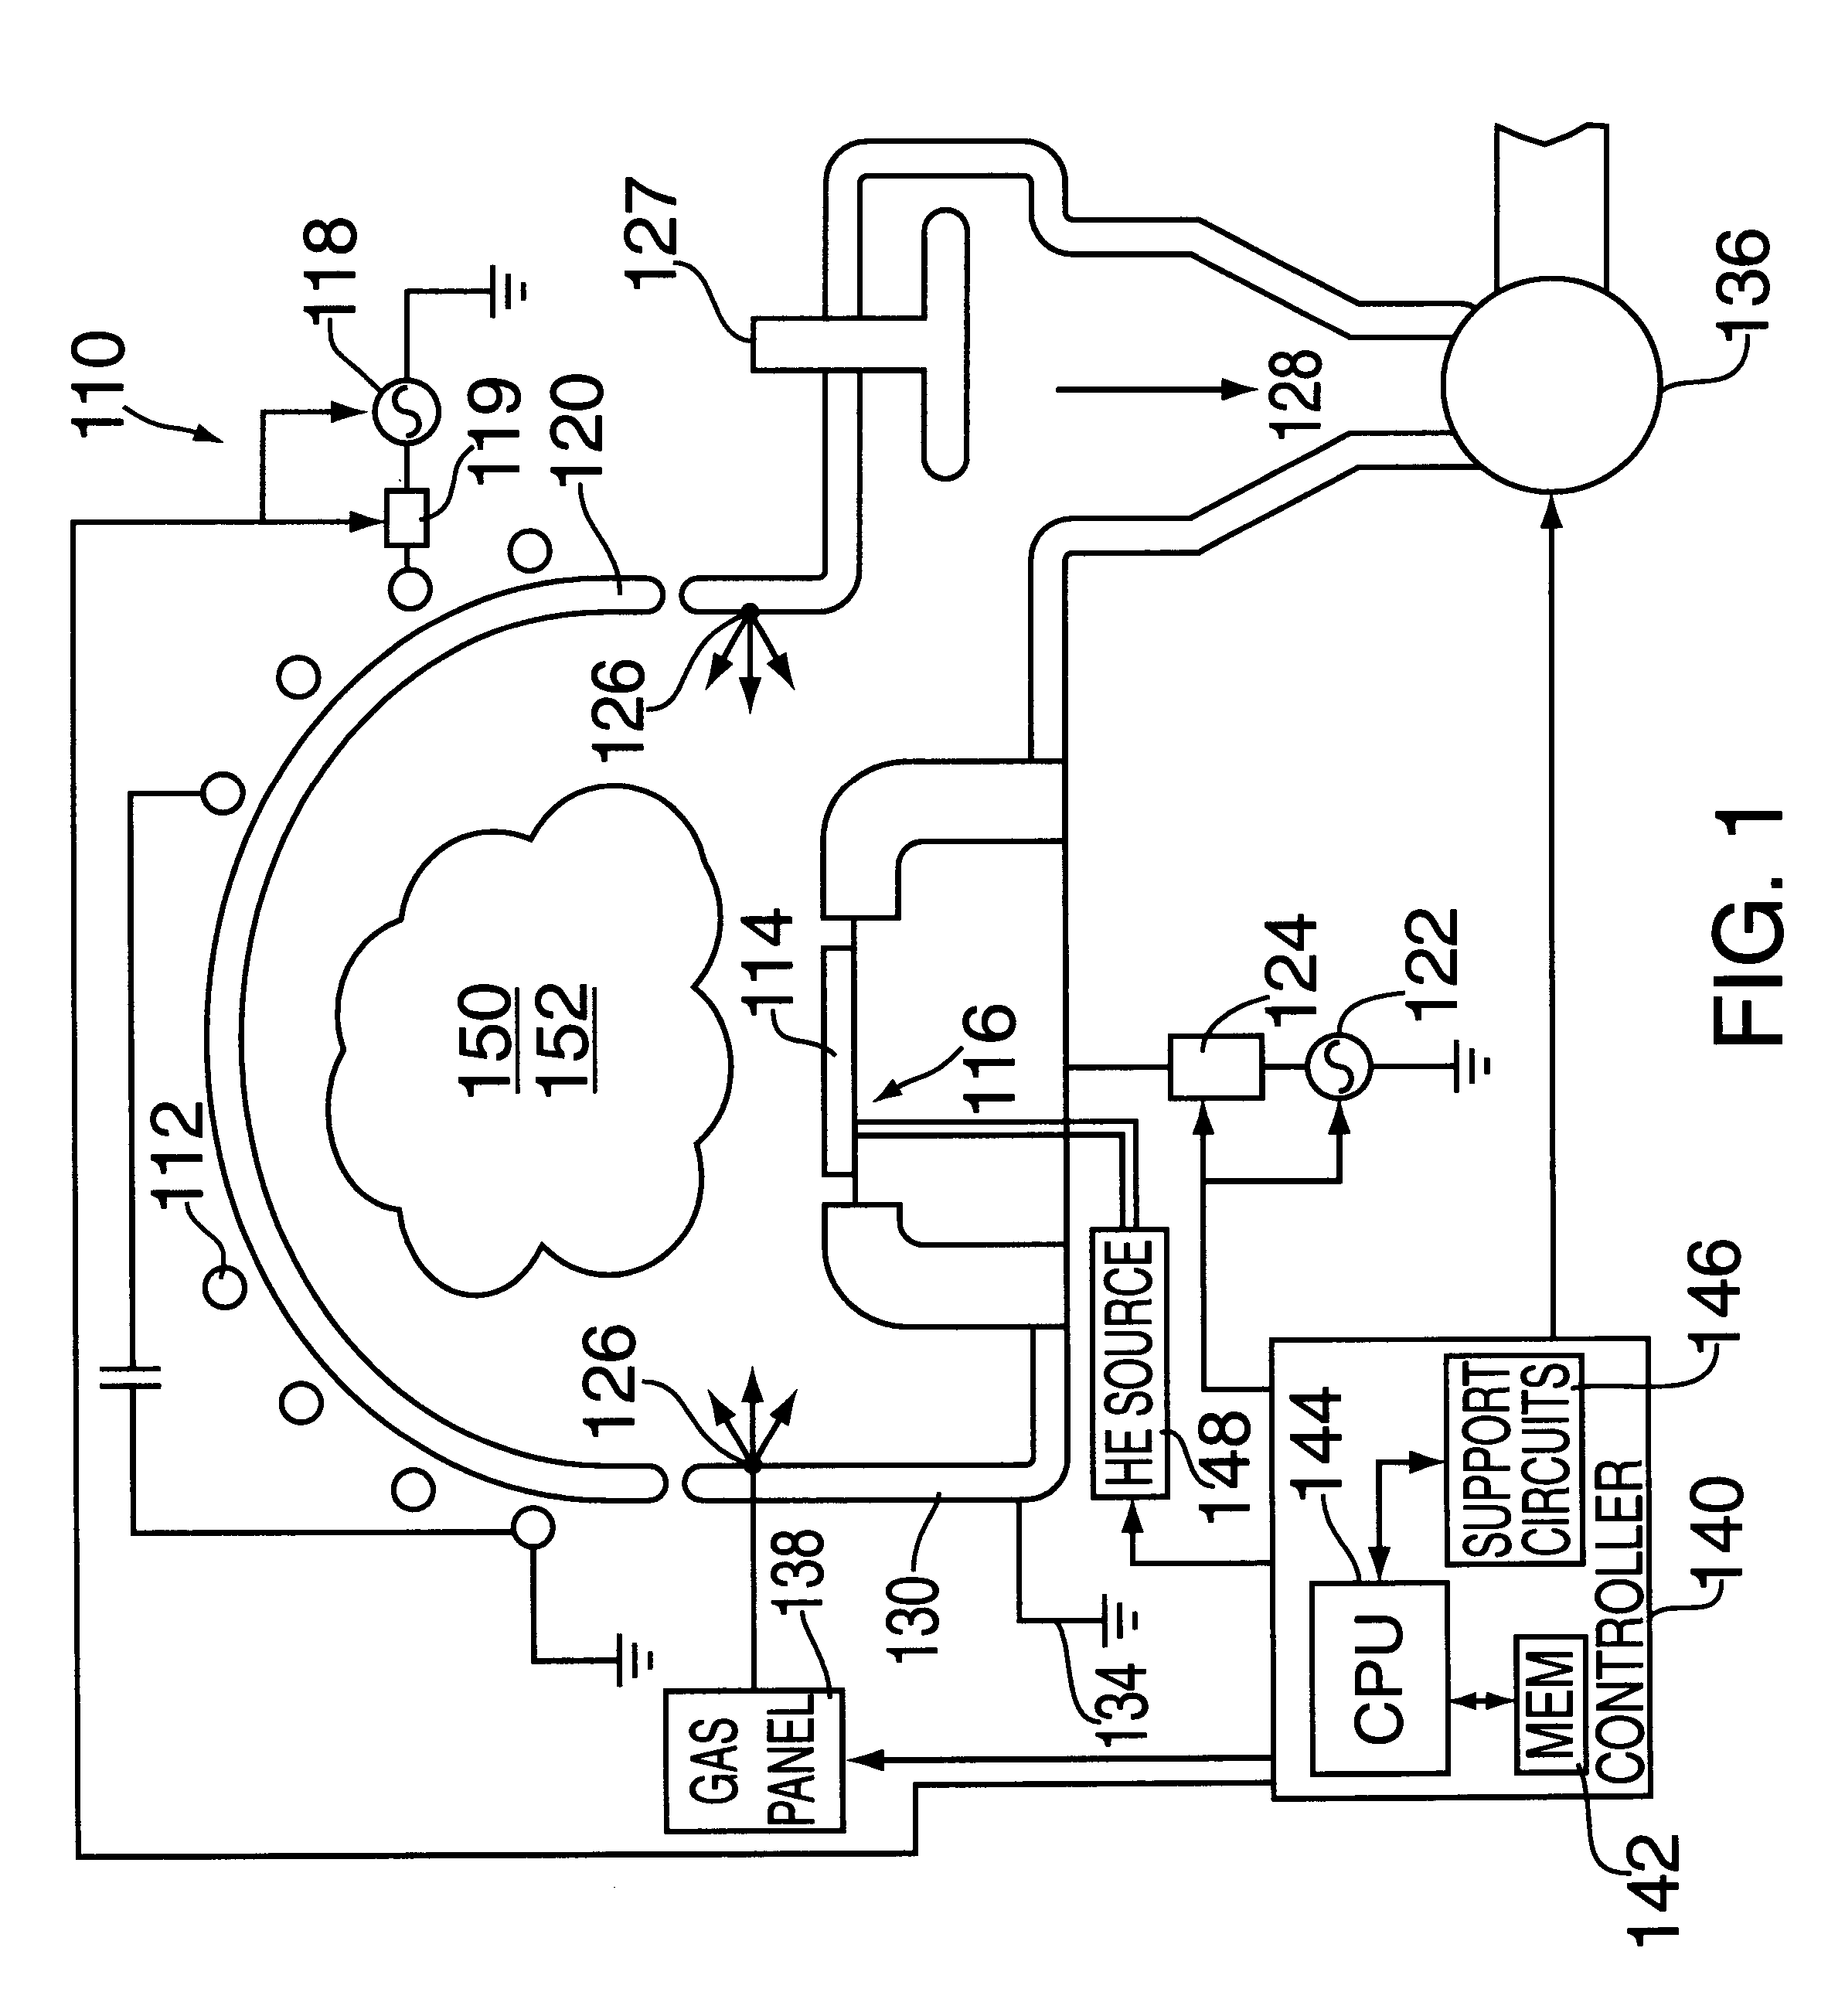 Plasma processing of tungsten using a gas mixture comprising a fluorinated gas and oxygen